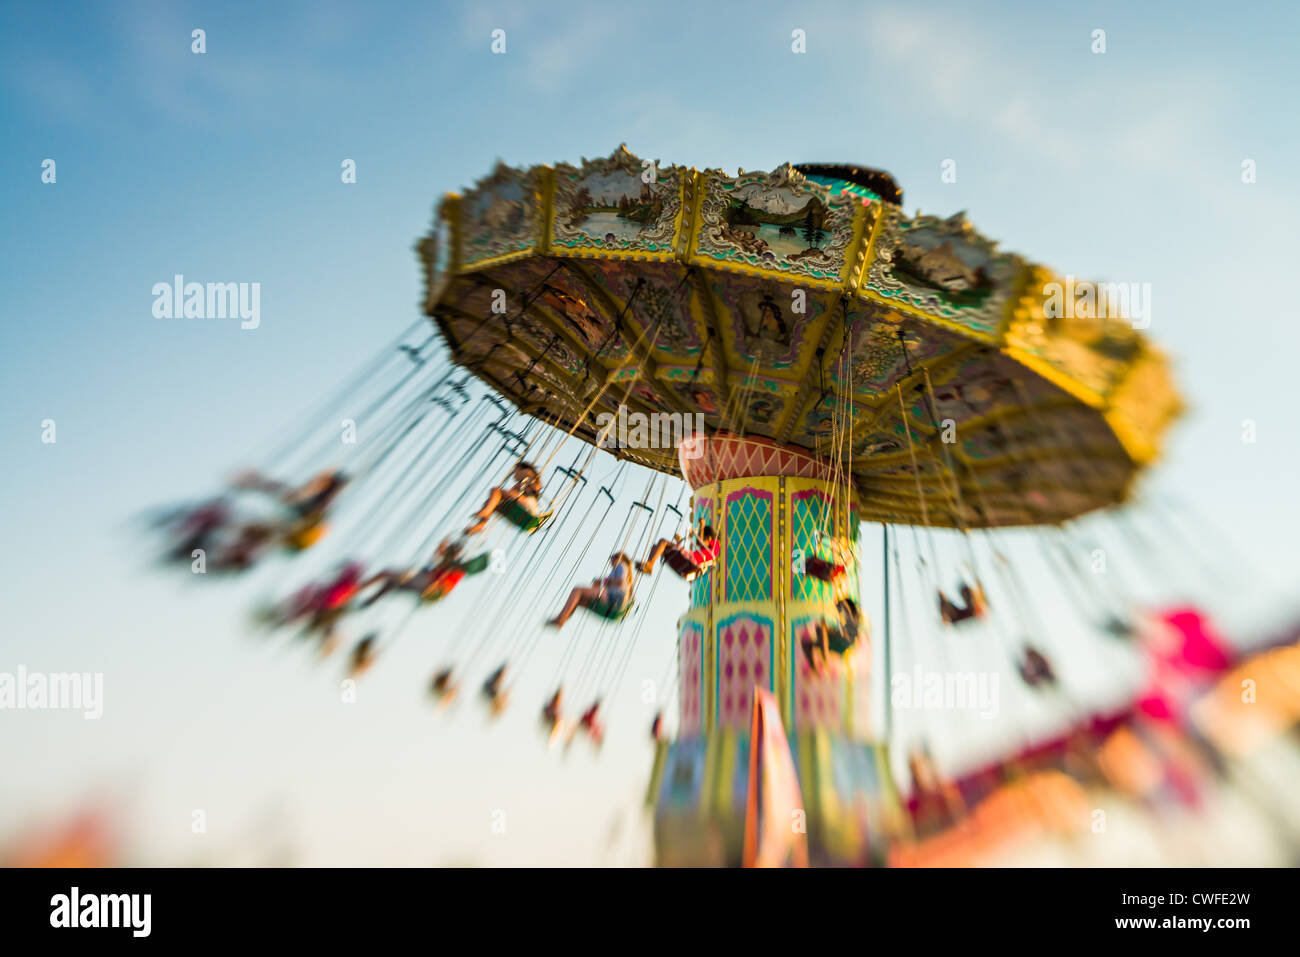 This is an image fairground attractions and rides at the Canadian national exhibition. Stock Photo